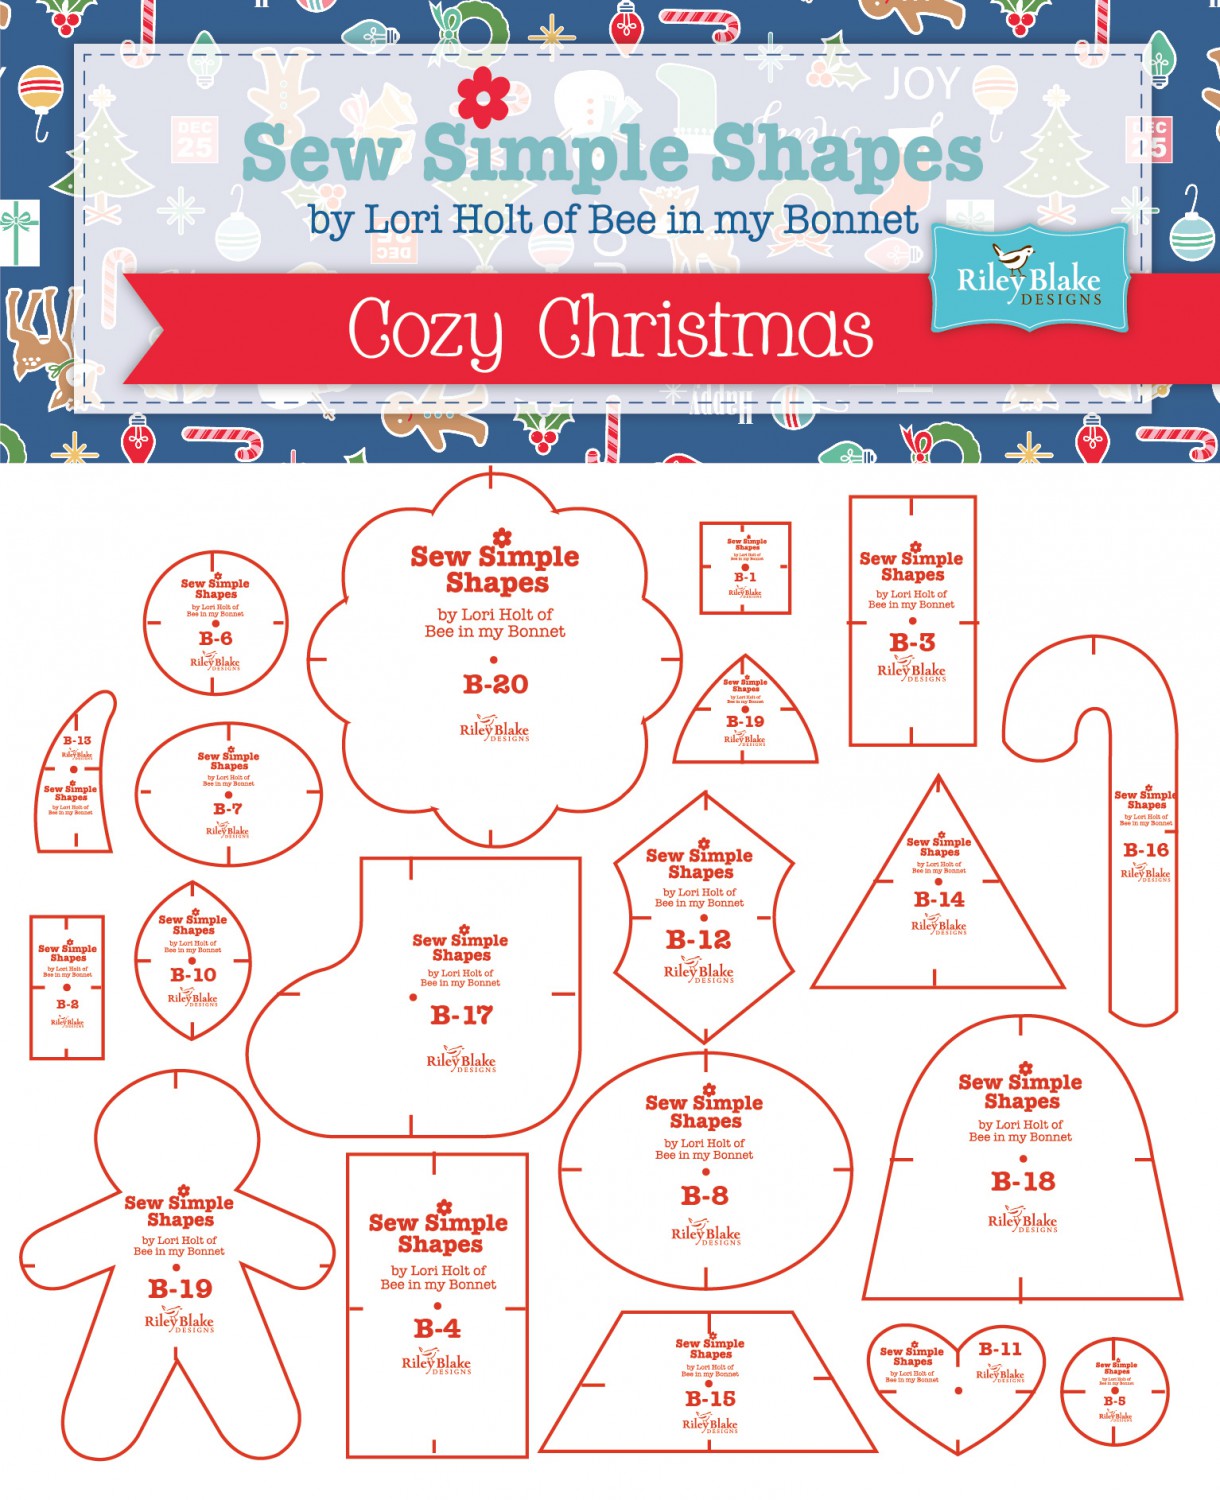 Cozy Christmas - Sew Simple Shapes